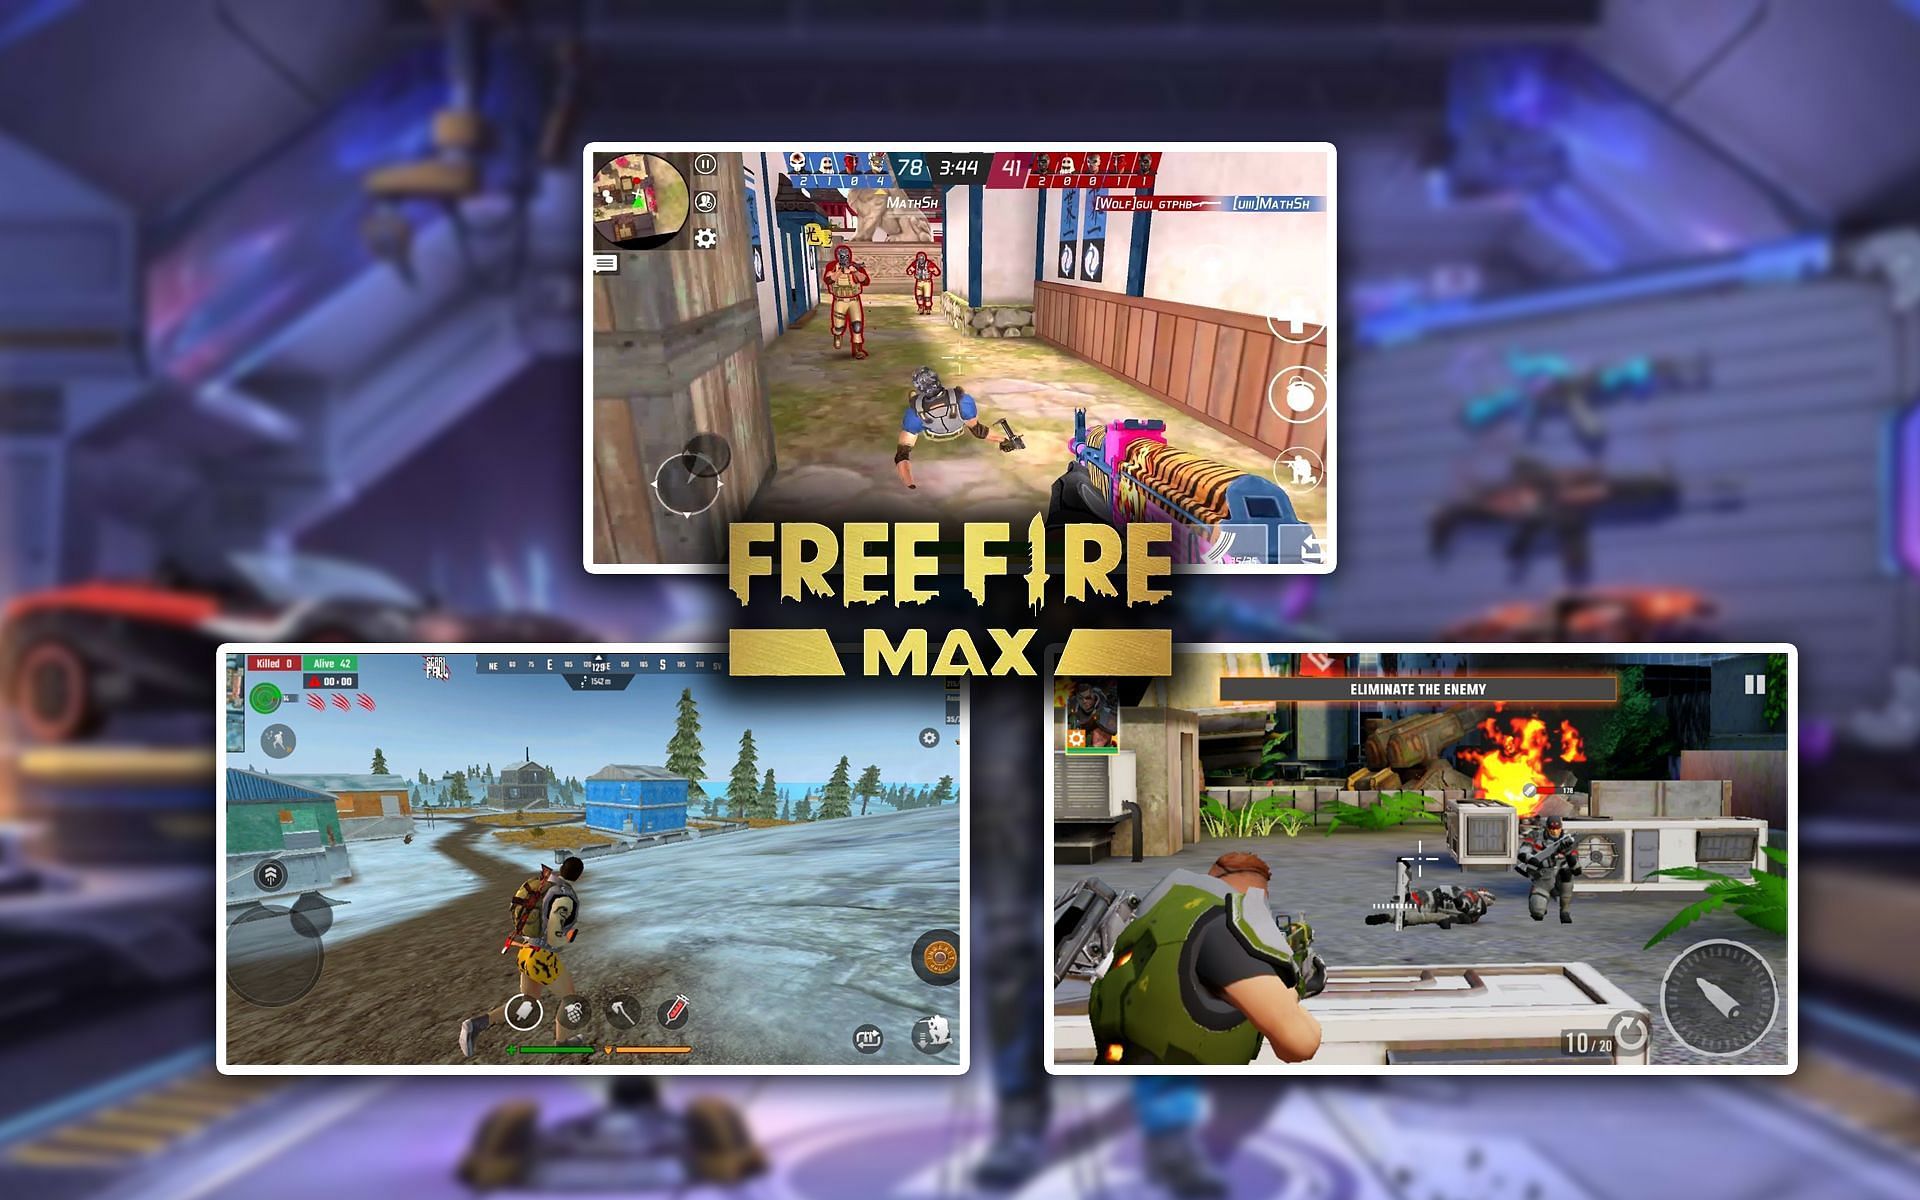 5 best multiplayer games like Free Fire for 1 GB RAM Android devices